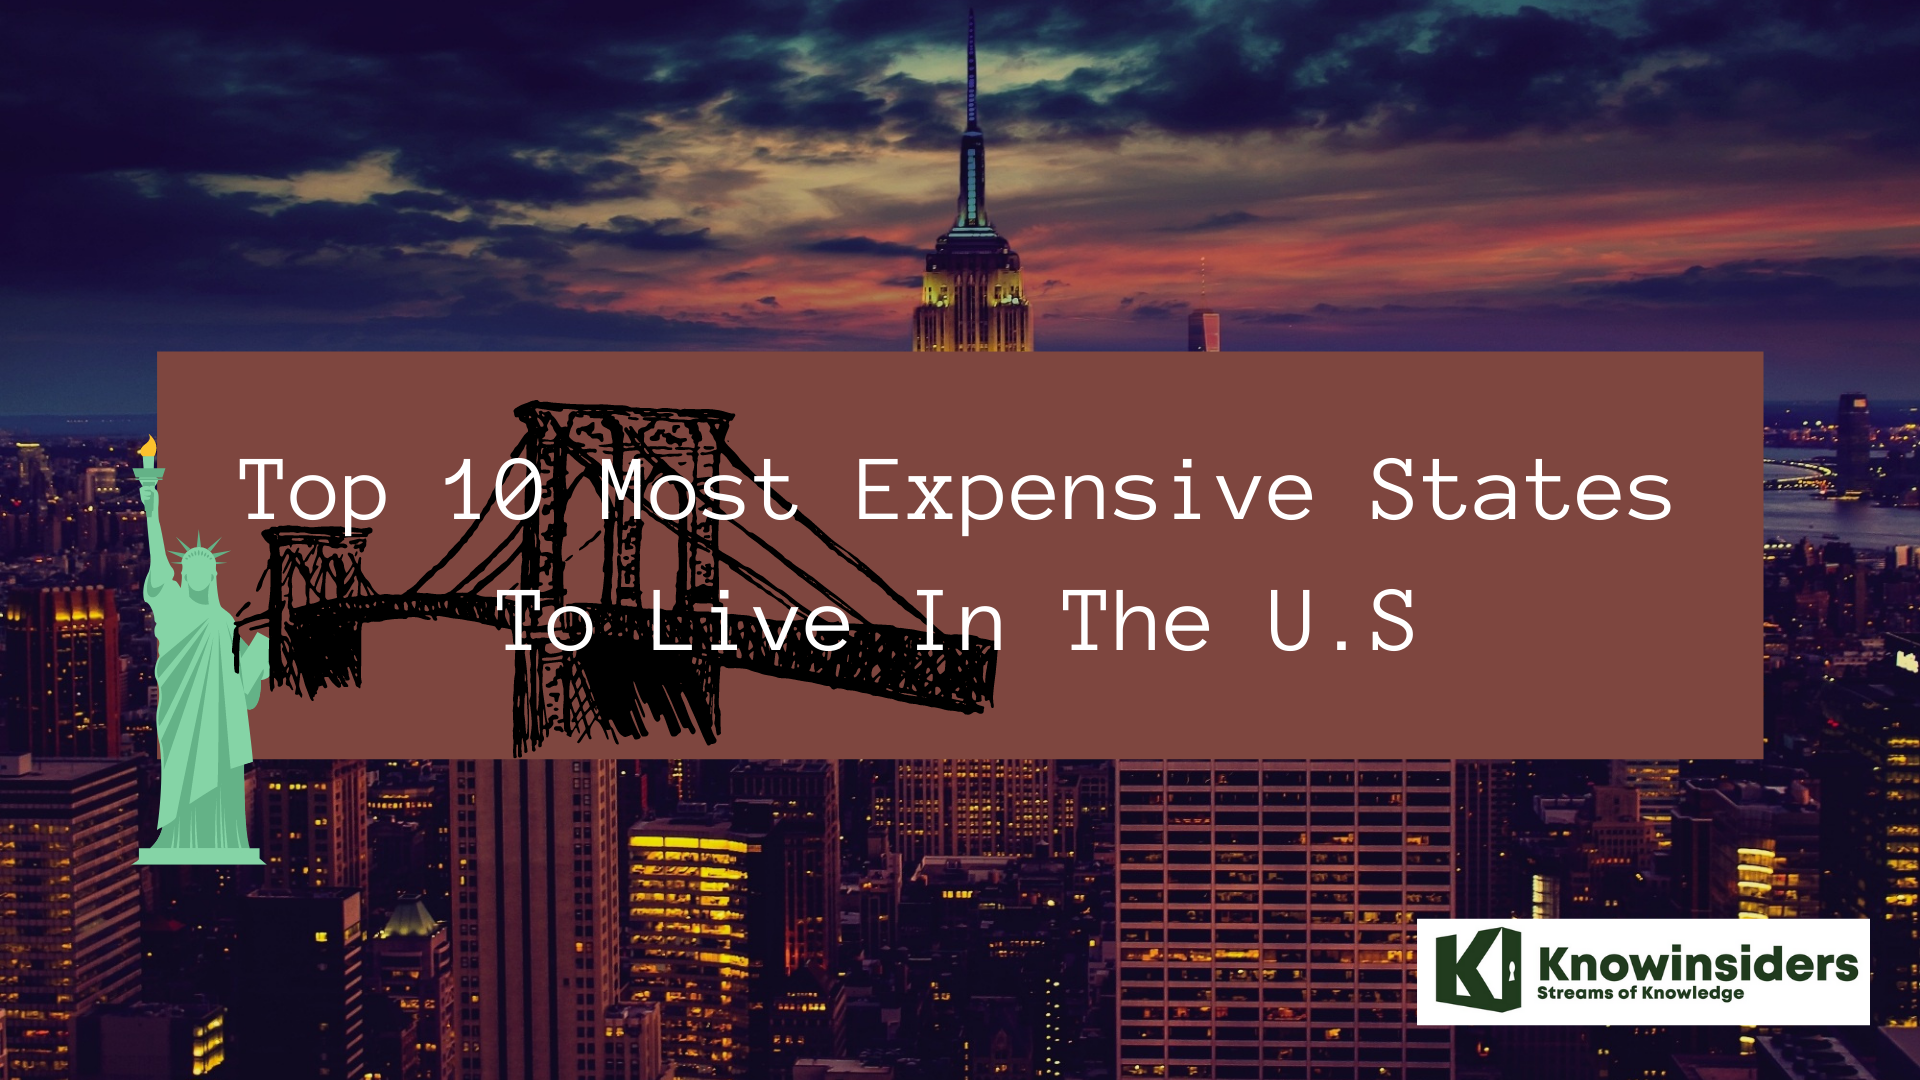 Top 10 Most Expensive States To Live In The U.S KnowInsiders